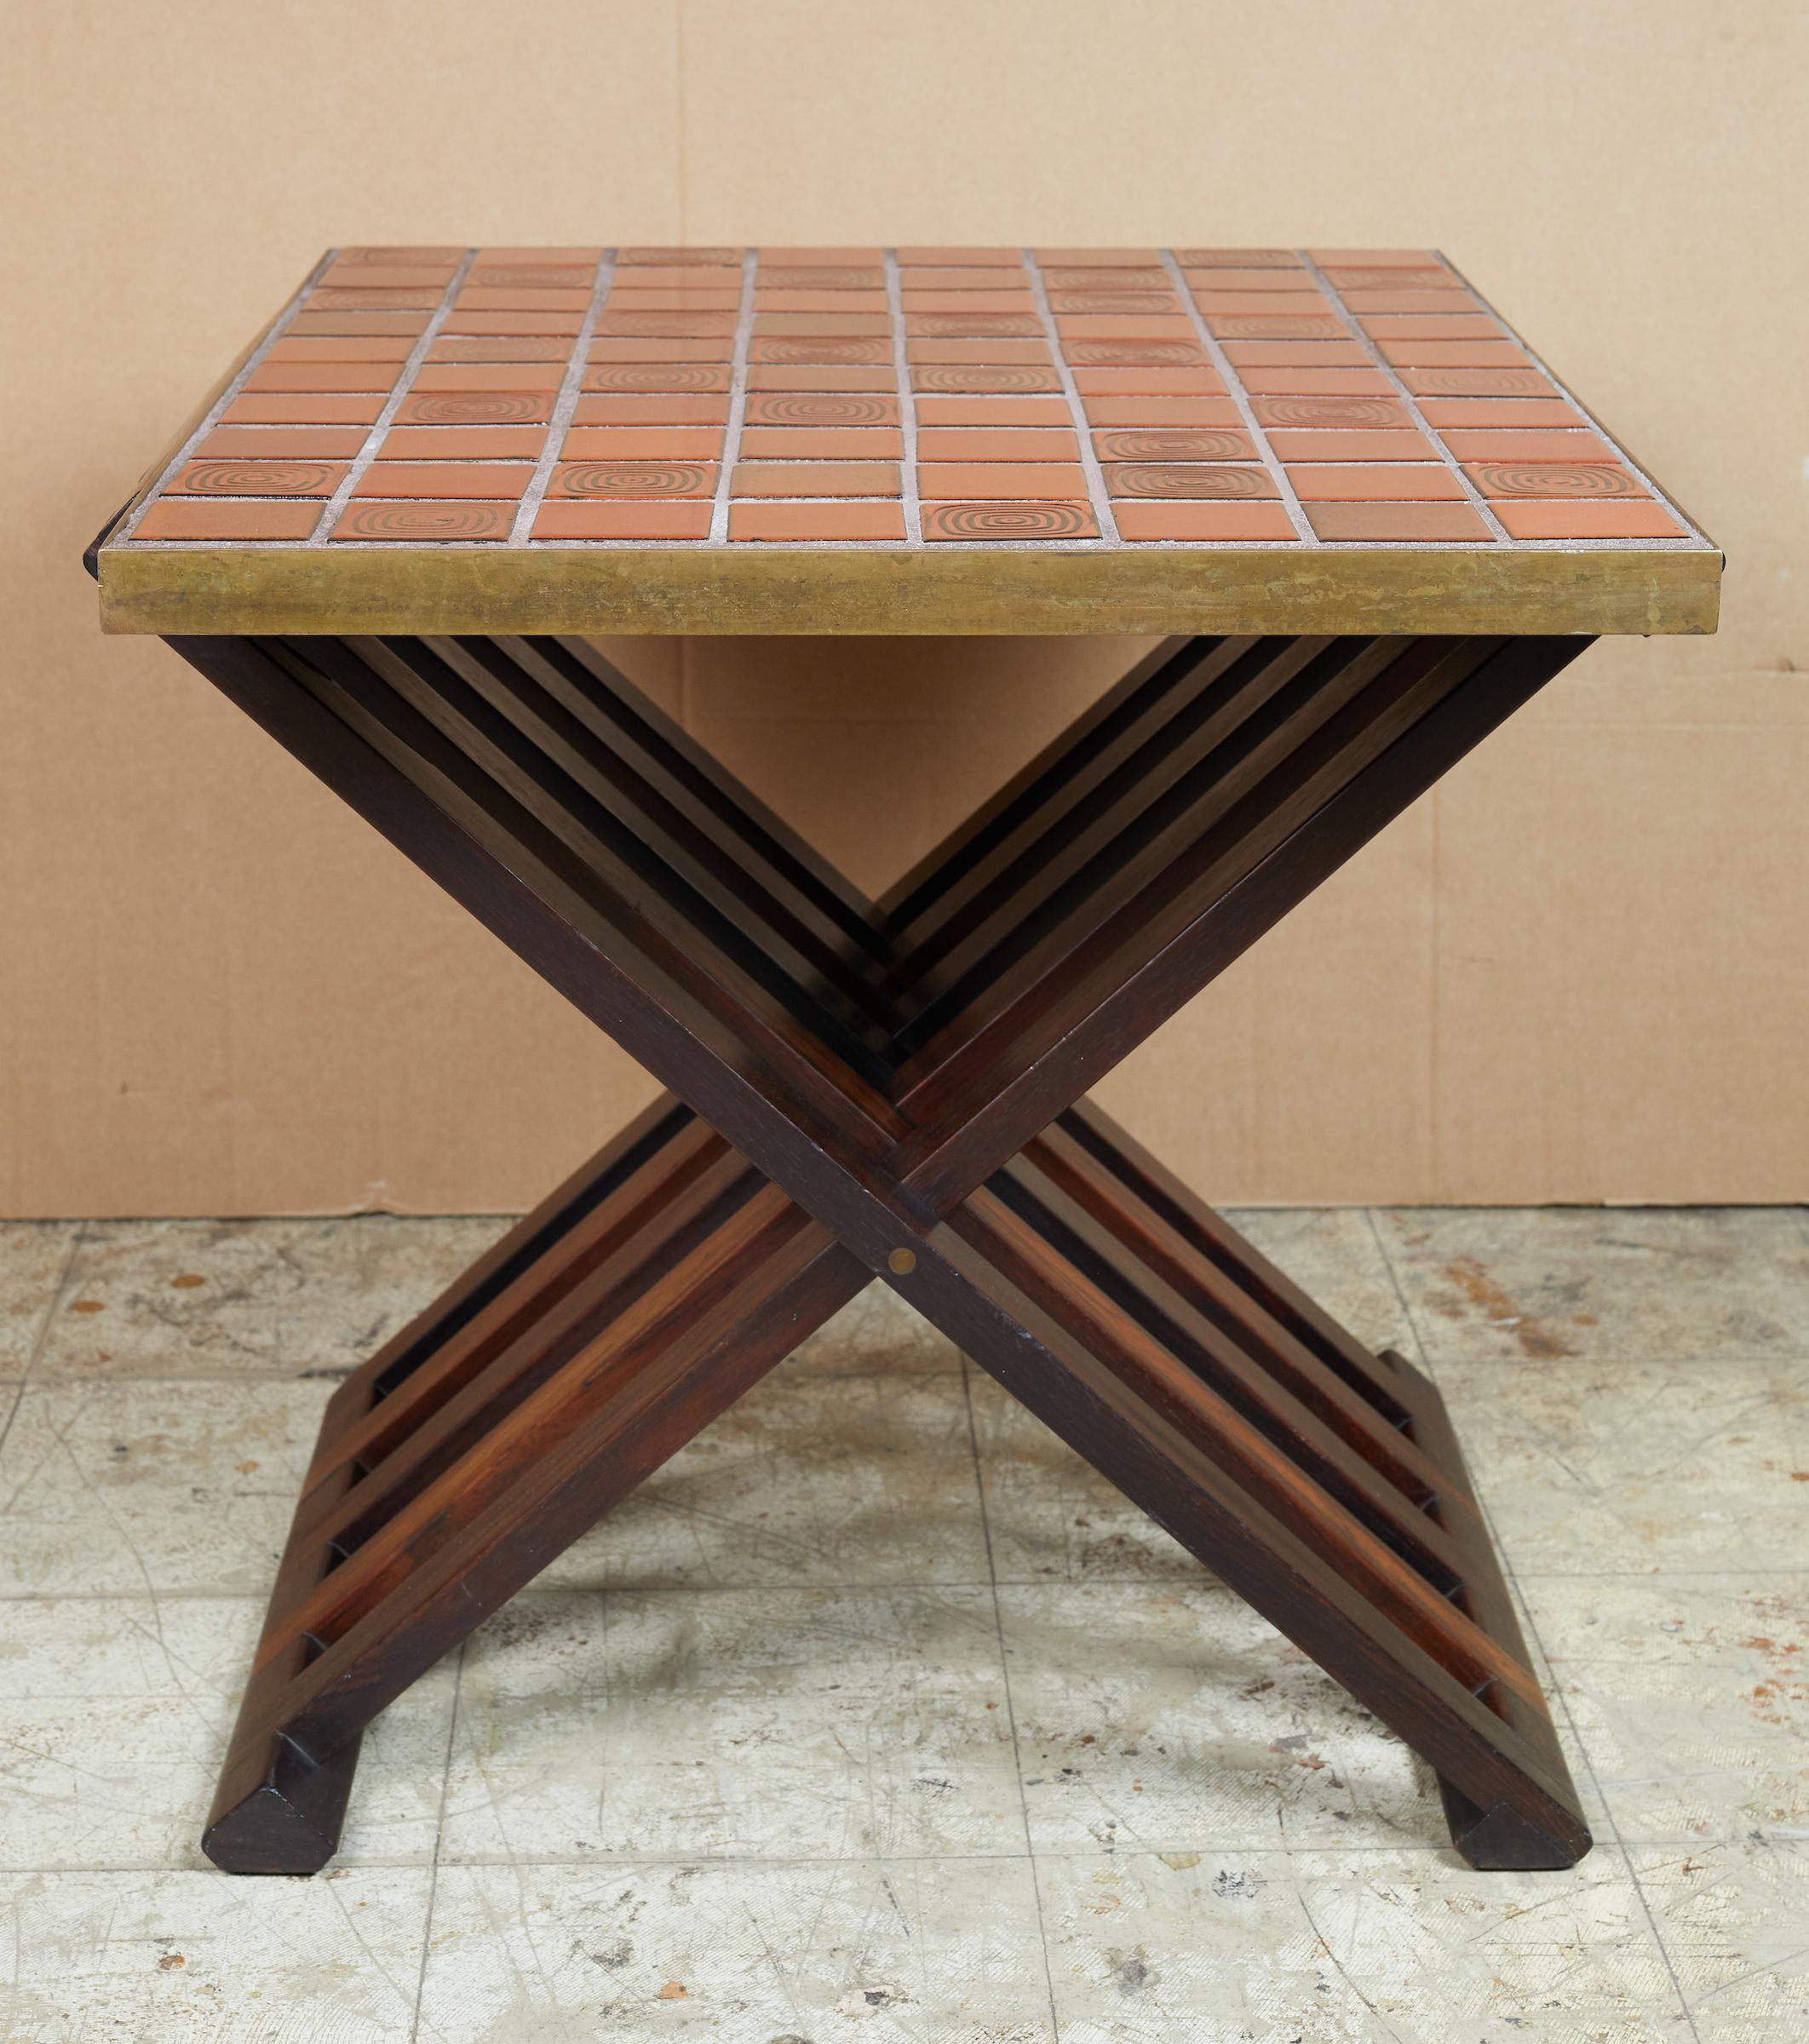 Rare wood X-form folding tile top table by Edward Wormley for Dunbar.
 Ceramic top by Gertrud and Otto Natzler.